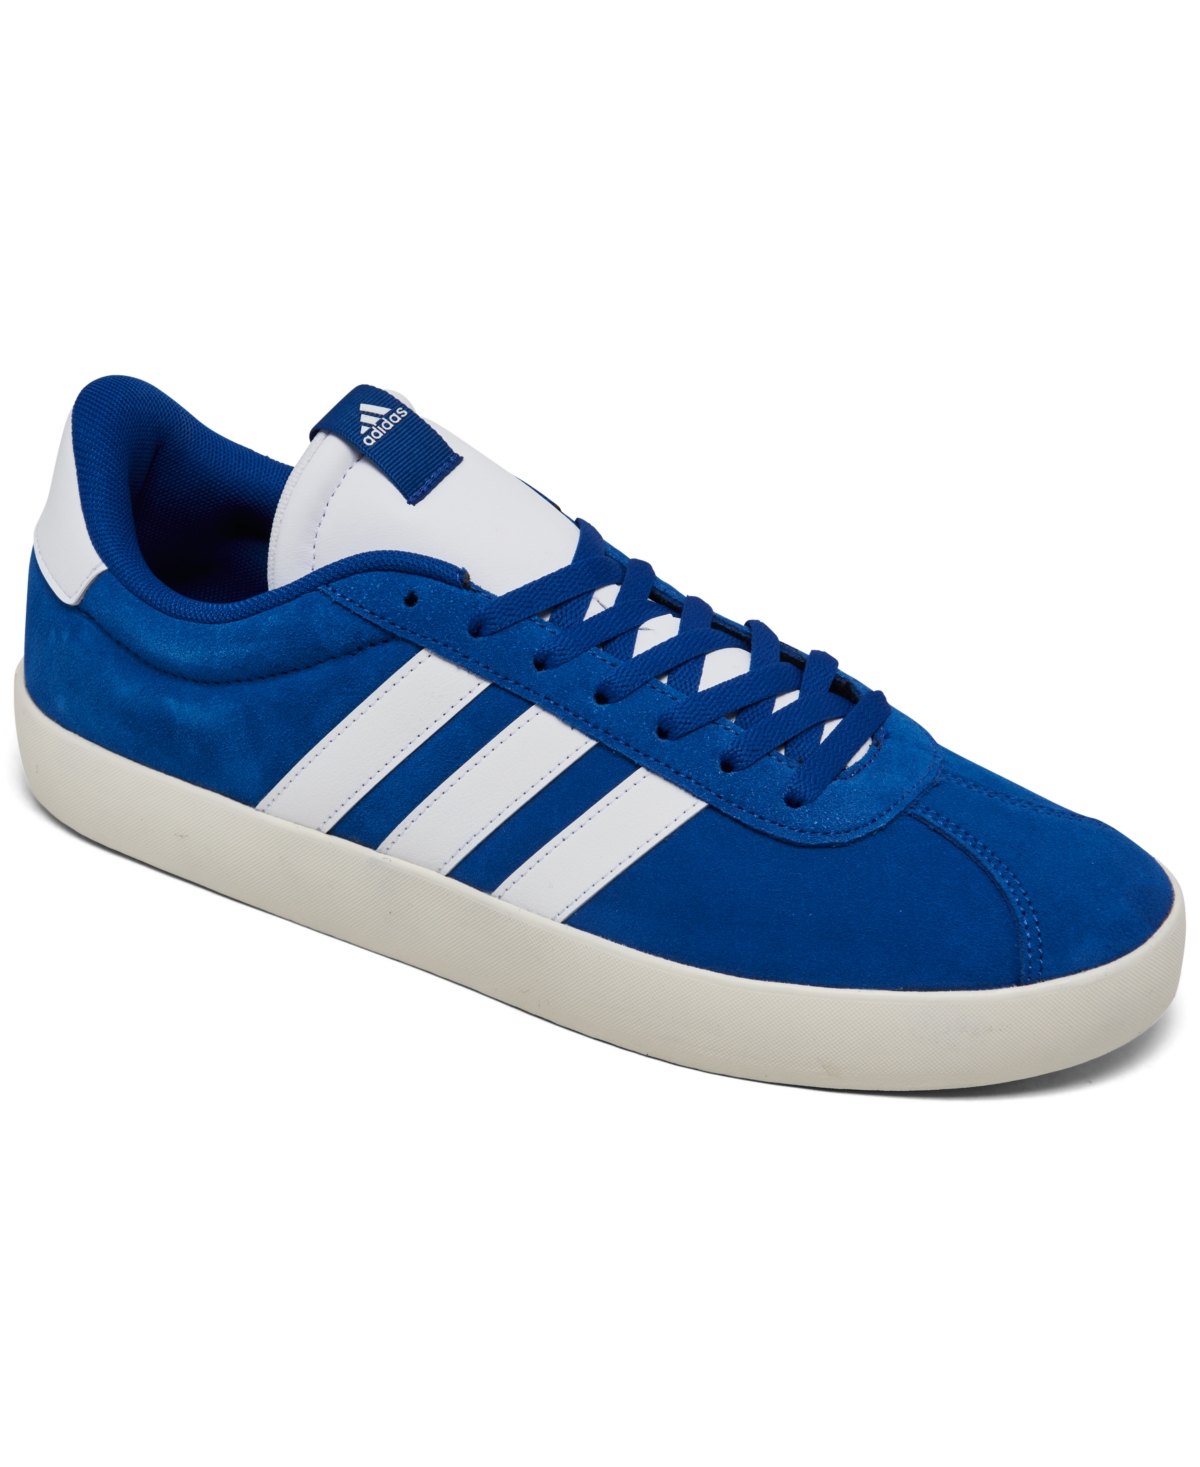 Men's Casual Sneakers from Finish Line - Royal Blue/White